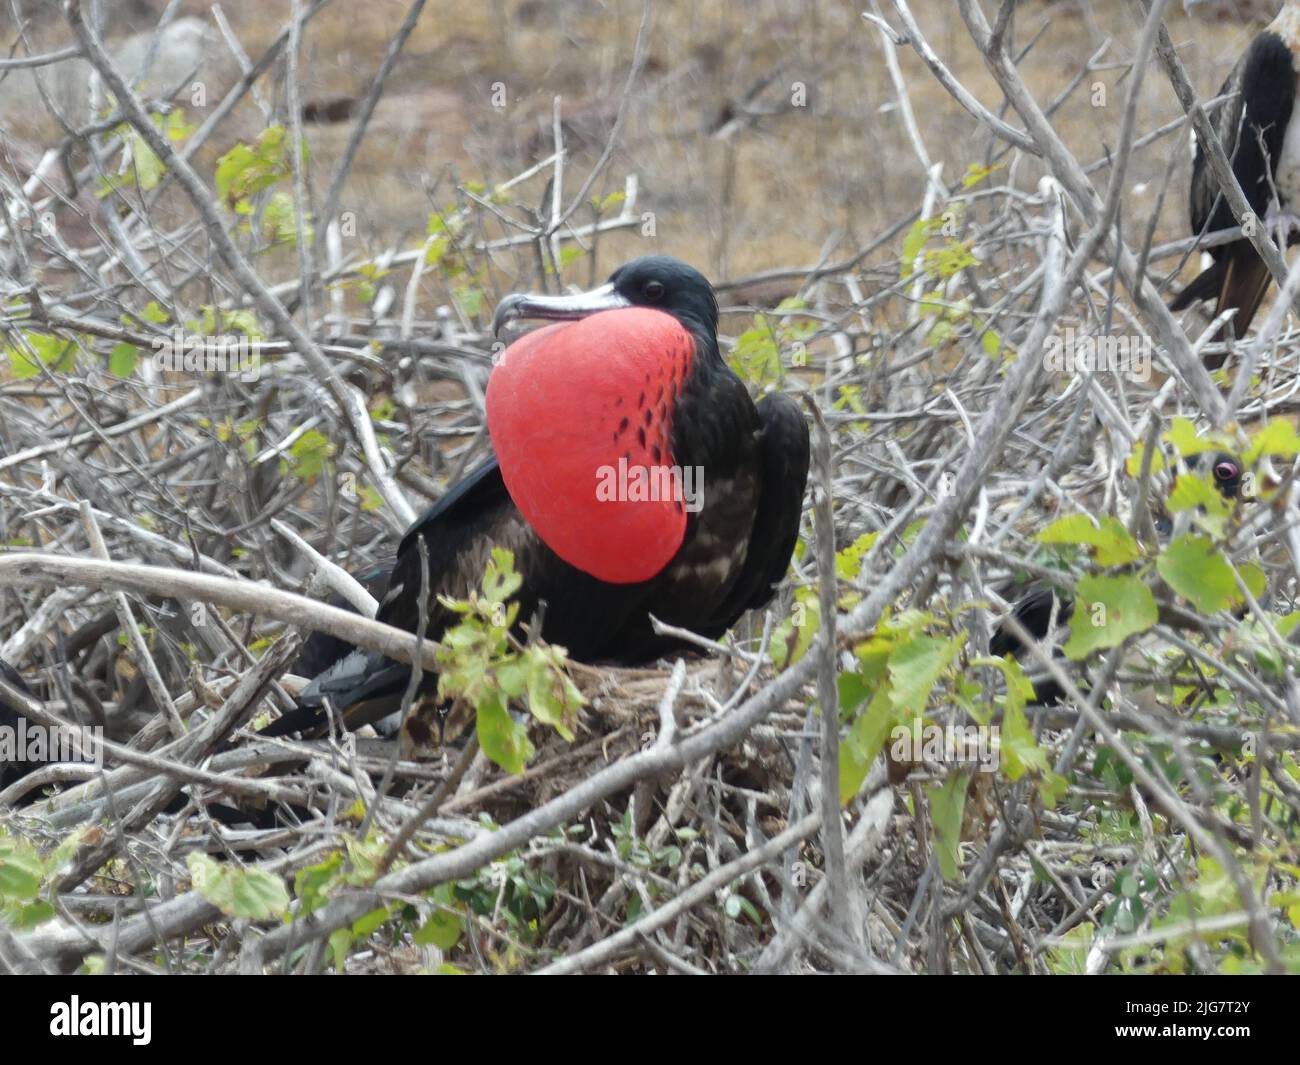 Adult frigate bird with iconic inflated red chest. North Seymour island Galapagos. May 2022. Stock Photo